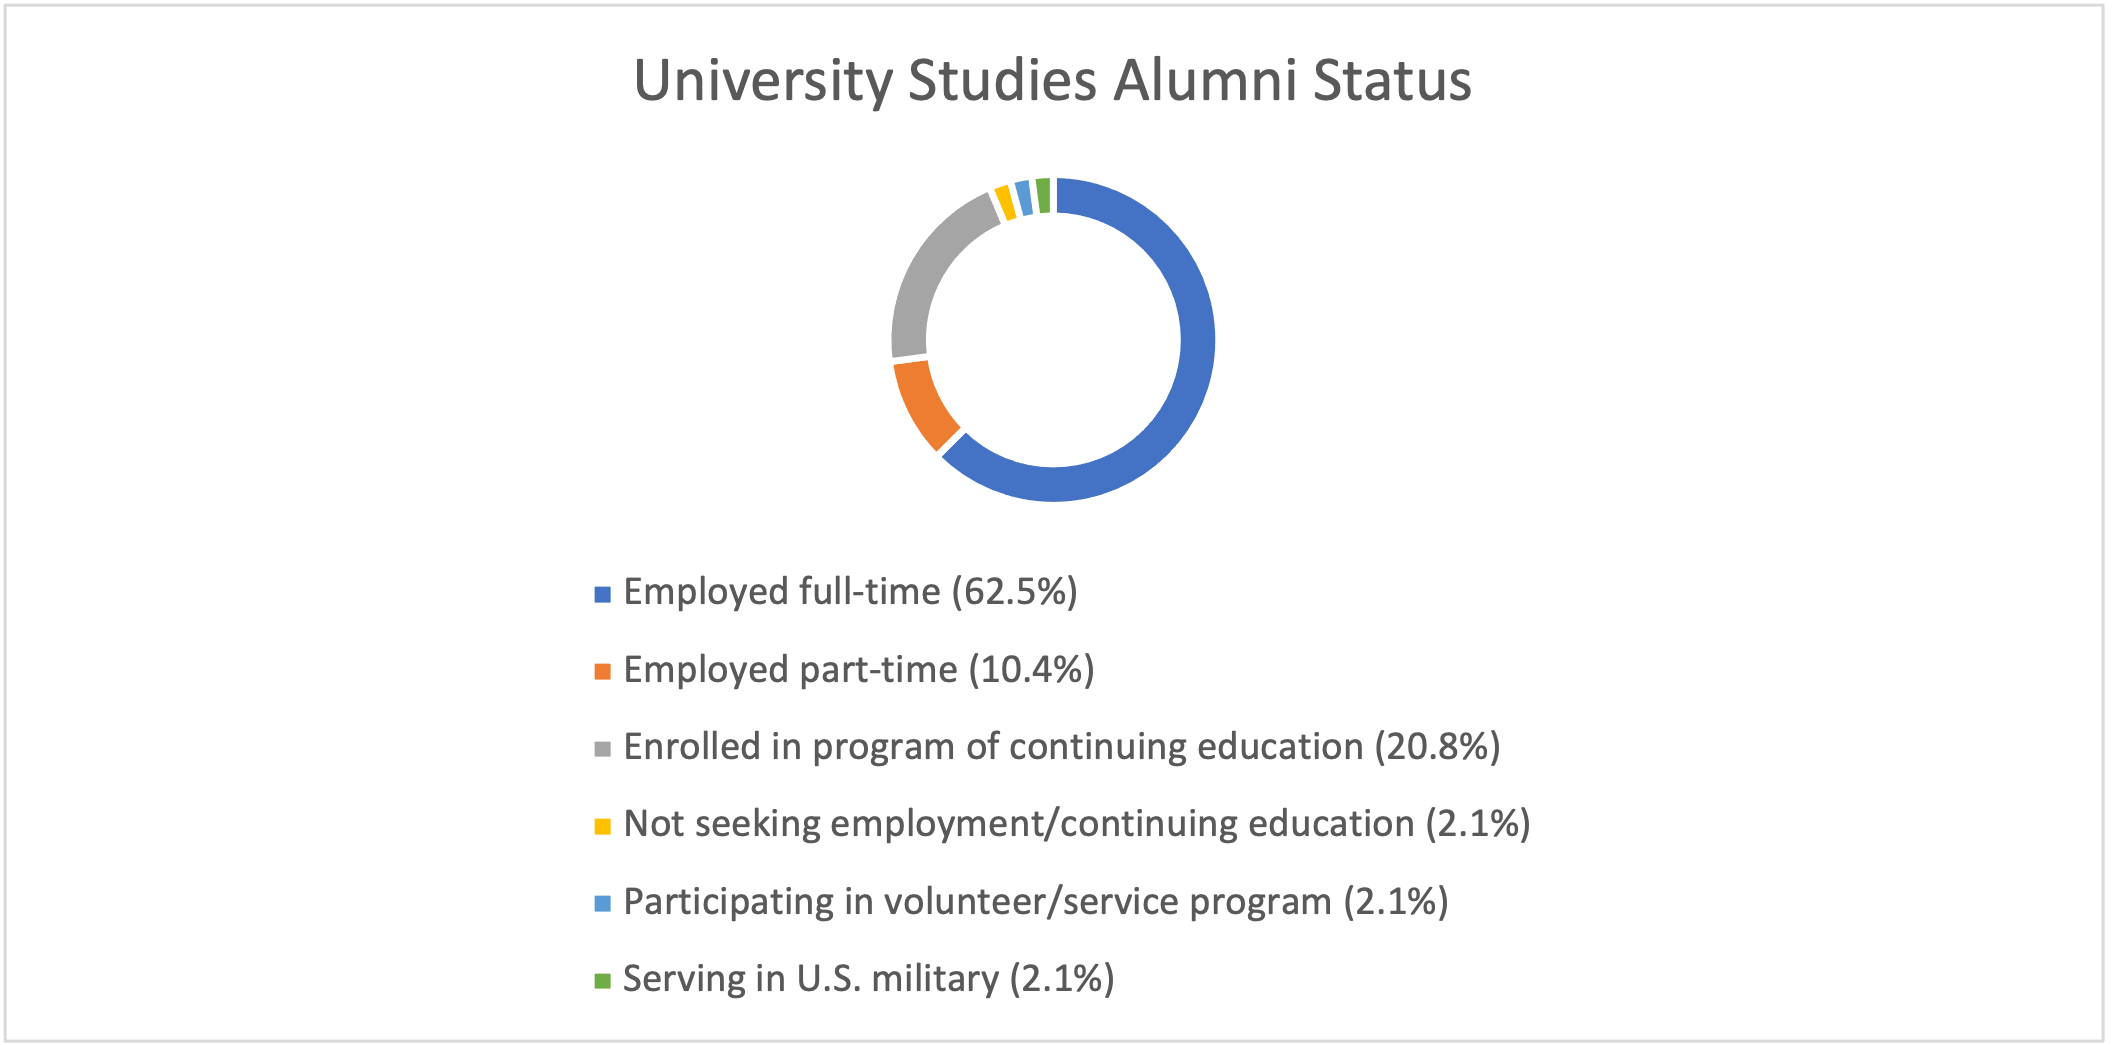 University Studies Alumni Status: Employed full-time (62.5%), Employed part-time (10.4%), Enrolled in program of continuing education (20.8%), Not seeking employment (2.1%), Participating in volunteer program (2.1%), Serving in U.S. military (2.1%) 